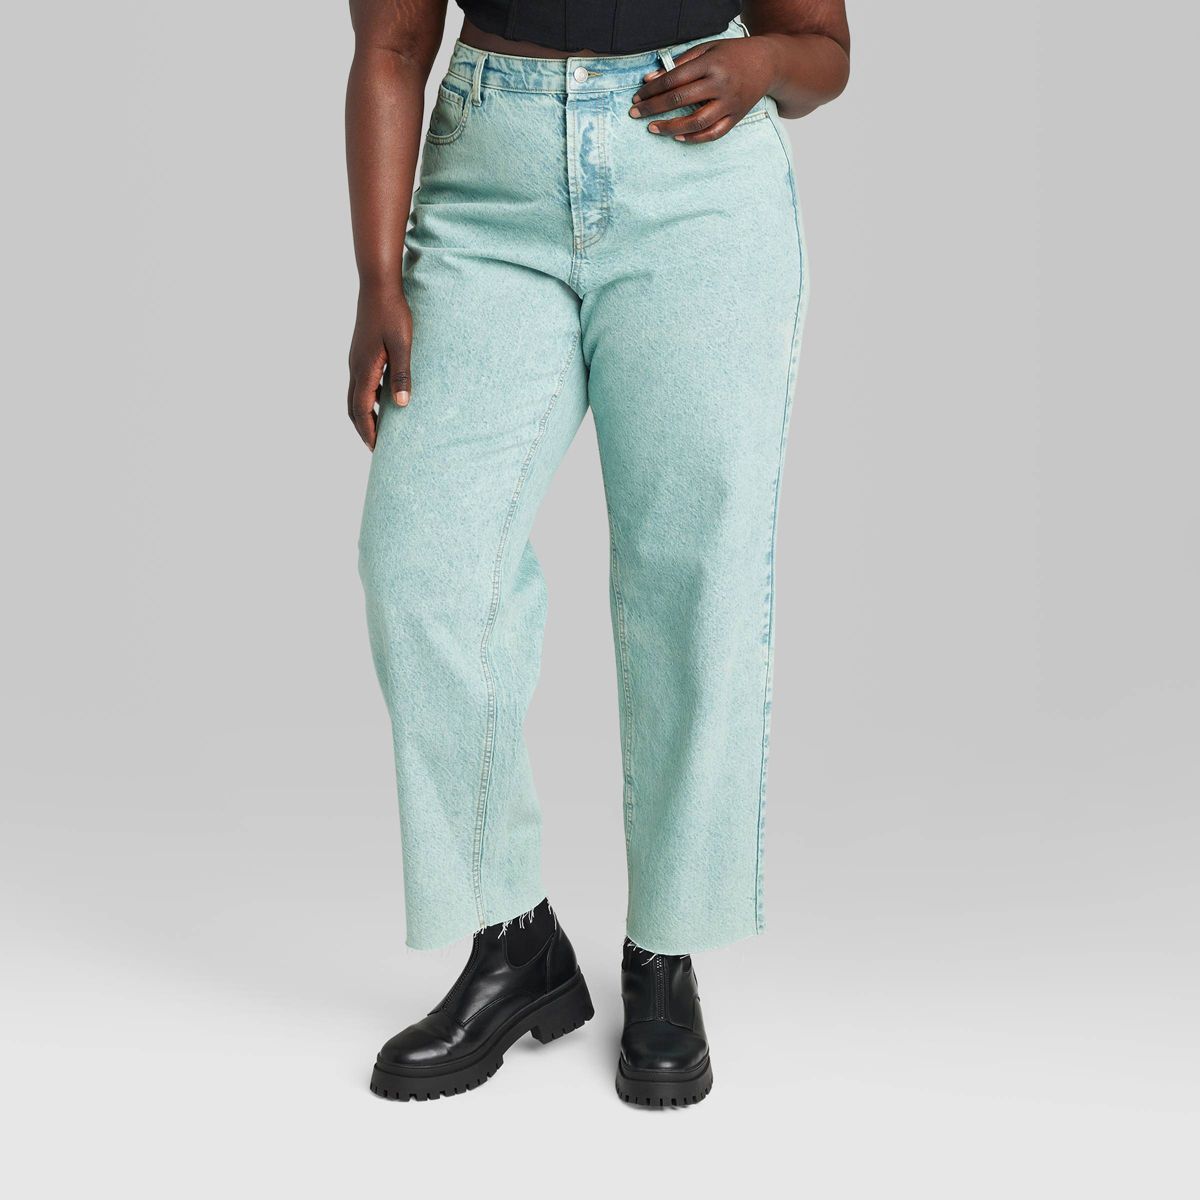 Women's High-Rise Straight Jeans - Wild Fable™ Light Teal Blue 18 | Target